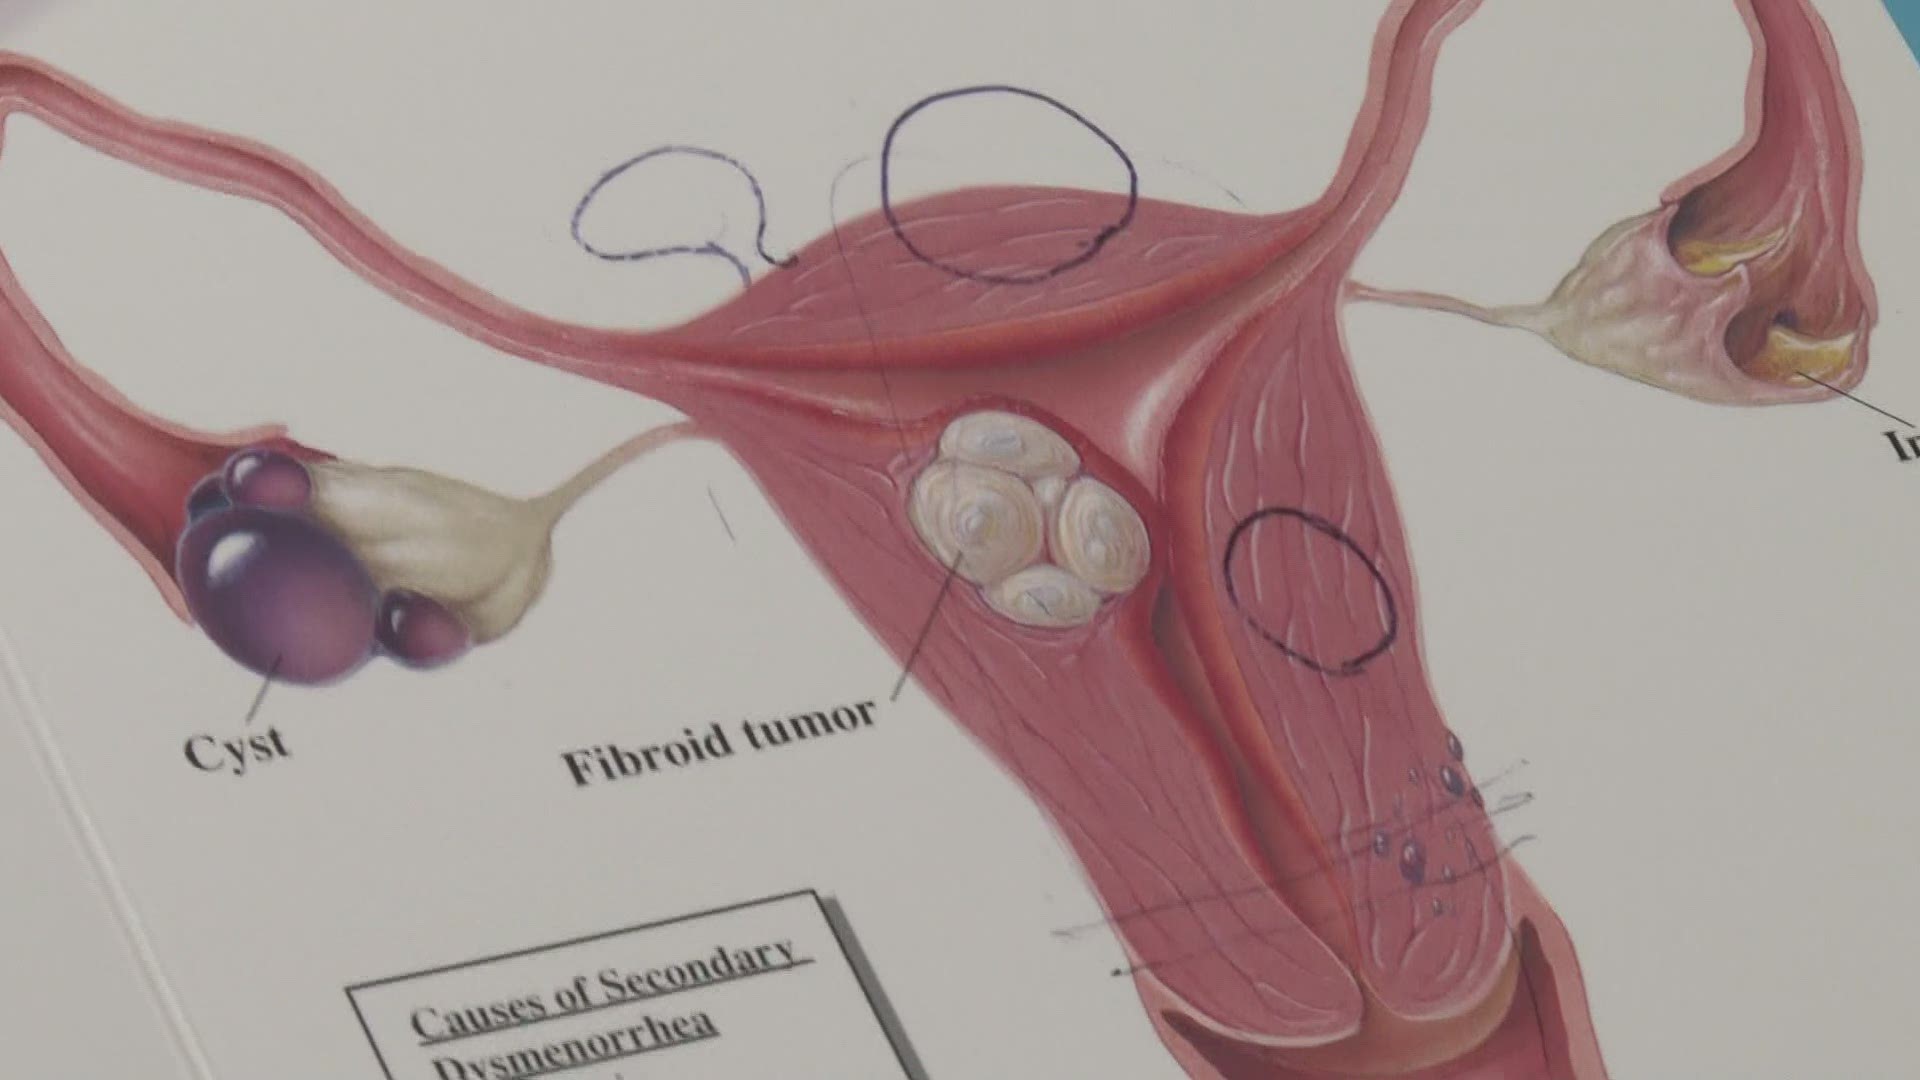 How to know if you have fibroids